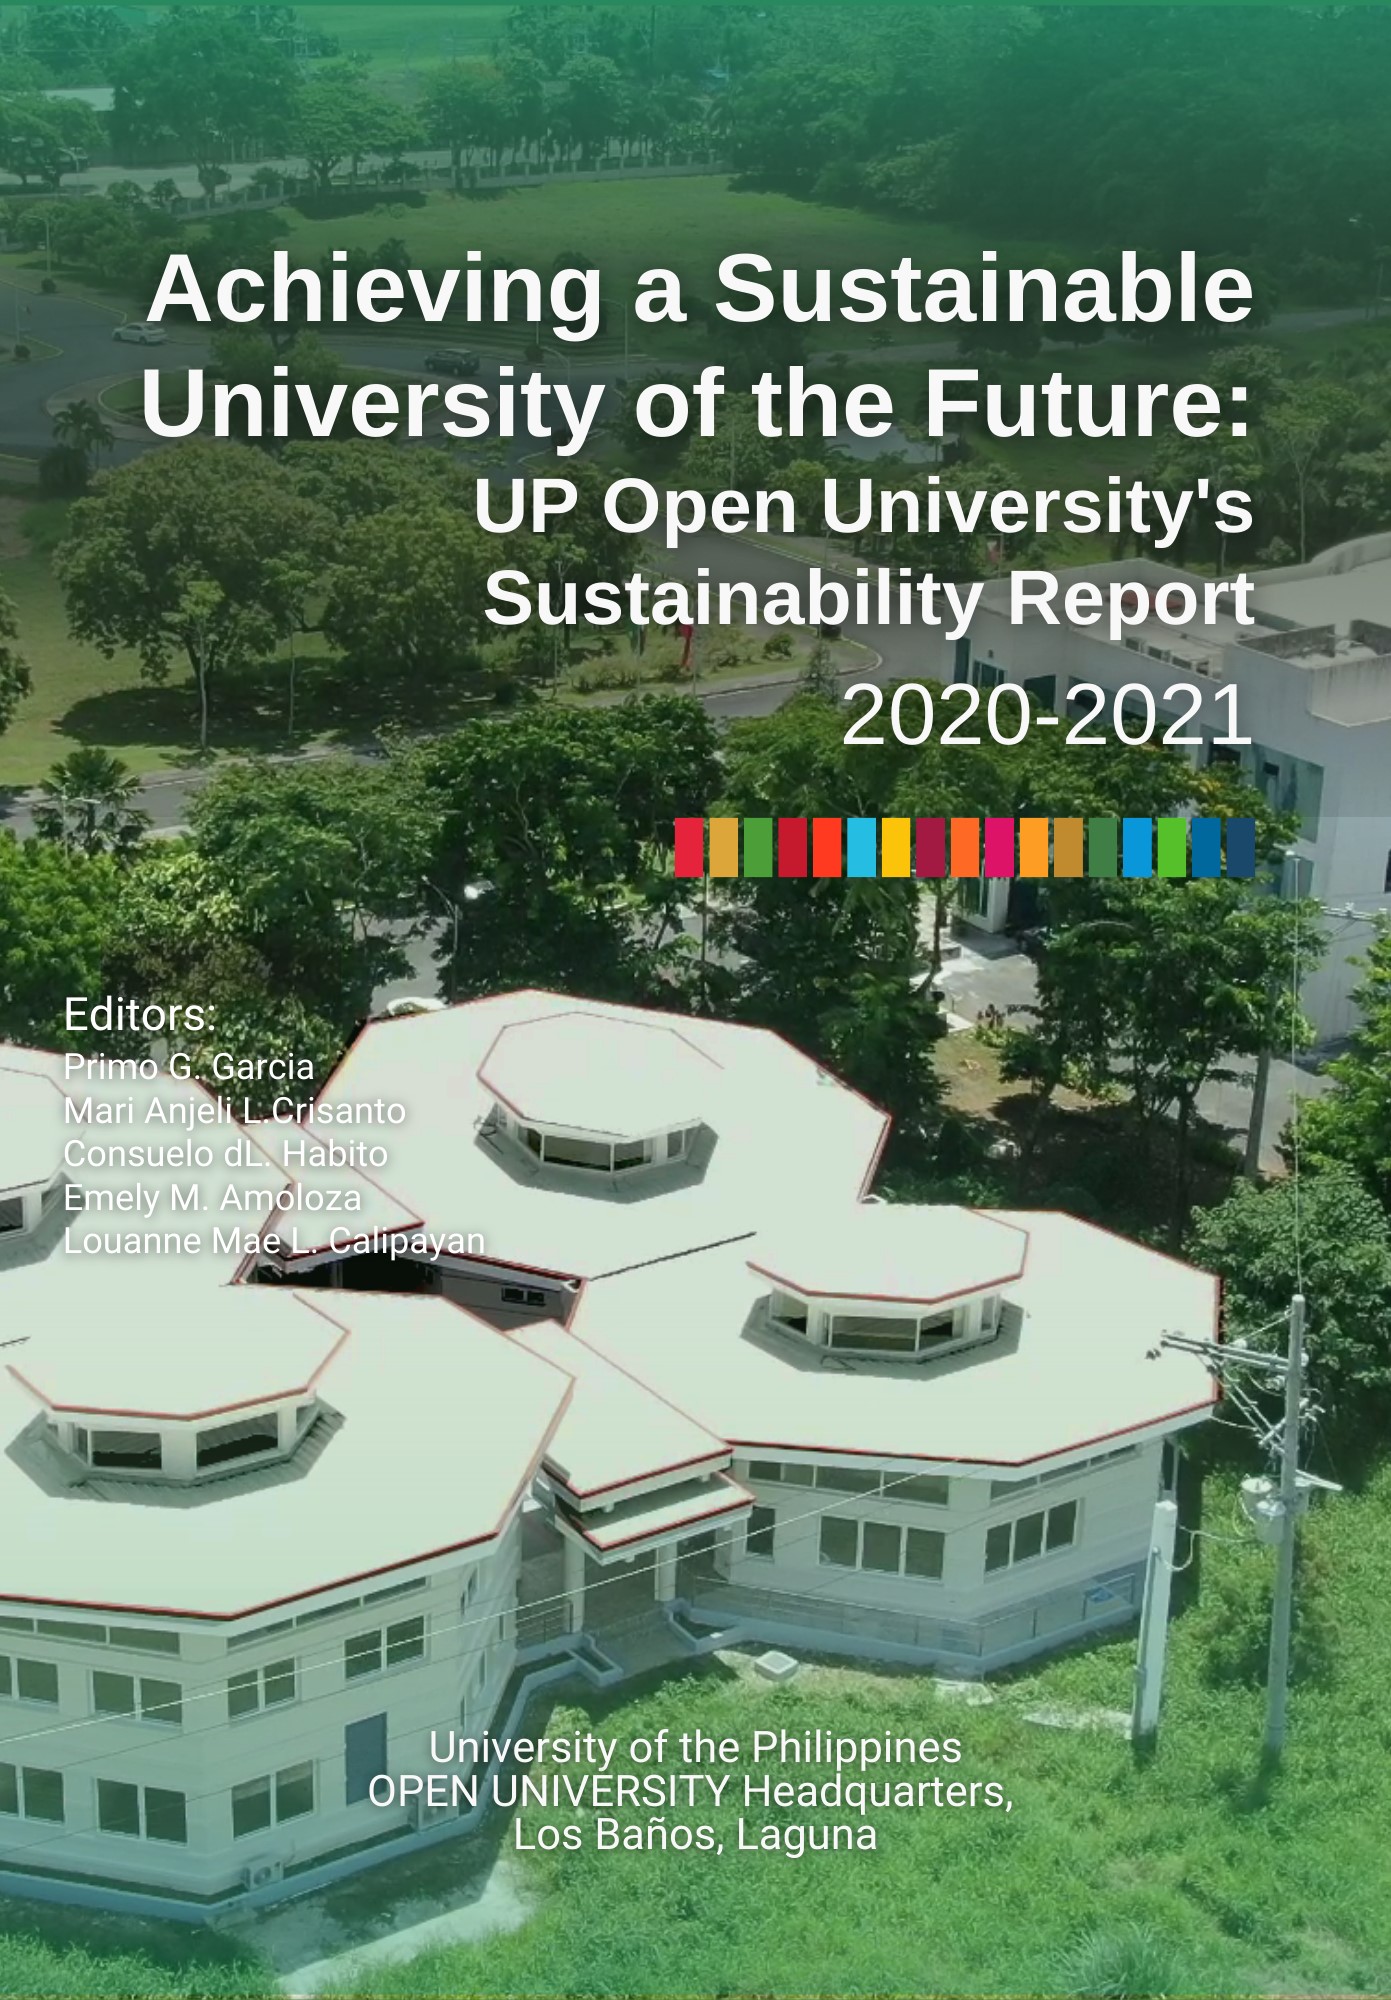 The front cover of UPOU’s Sustainability Report for CY 2020-2021.